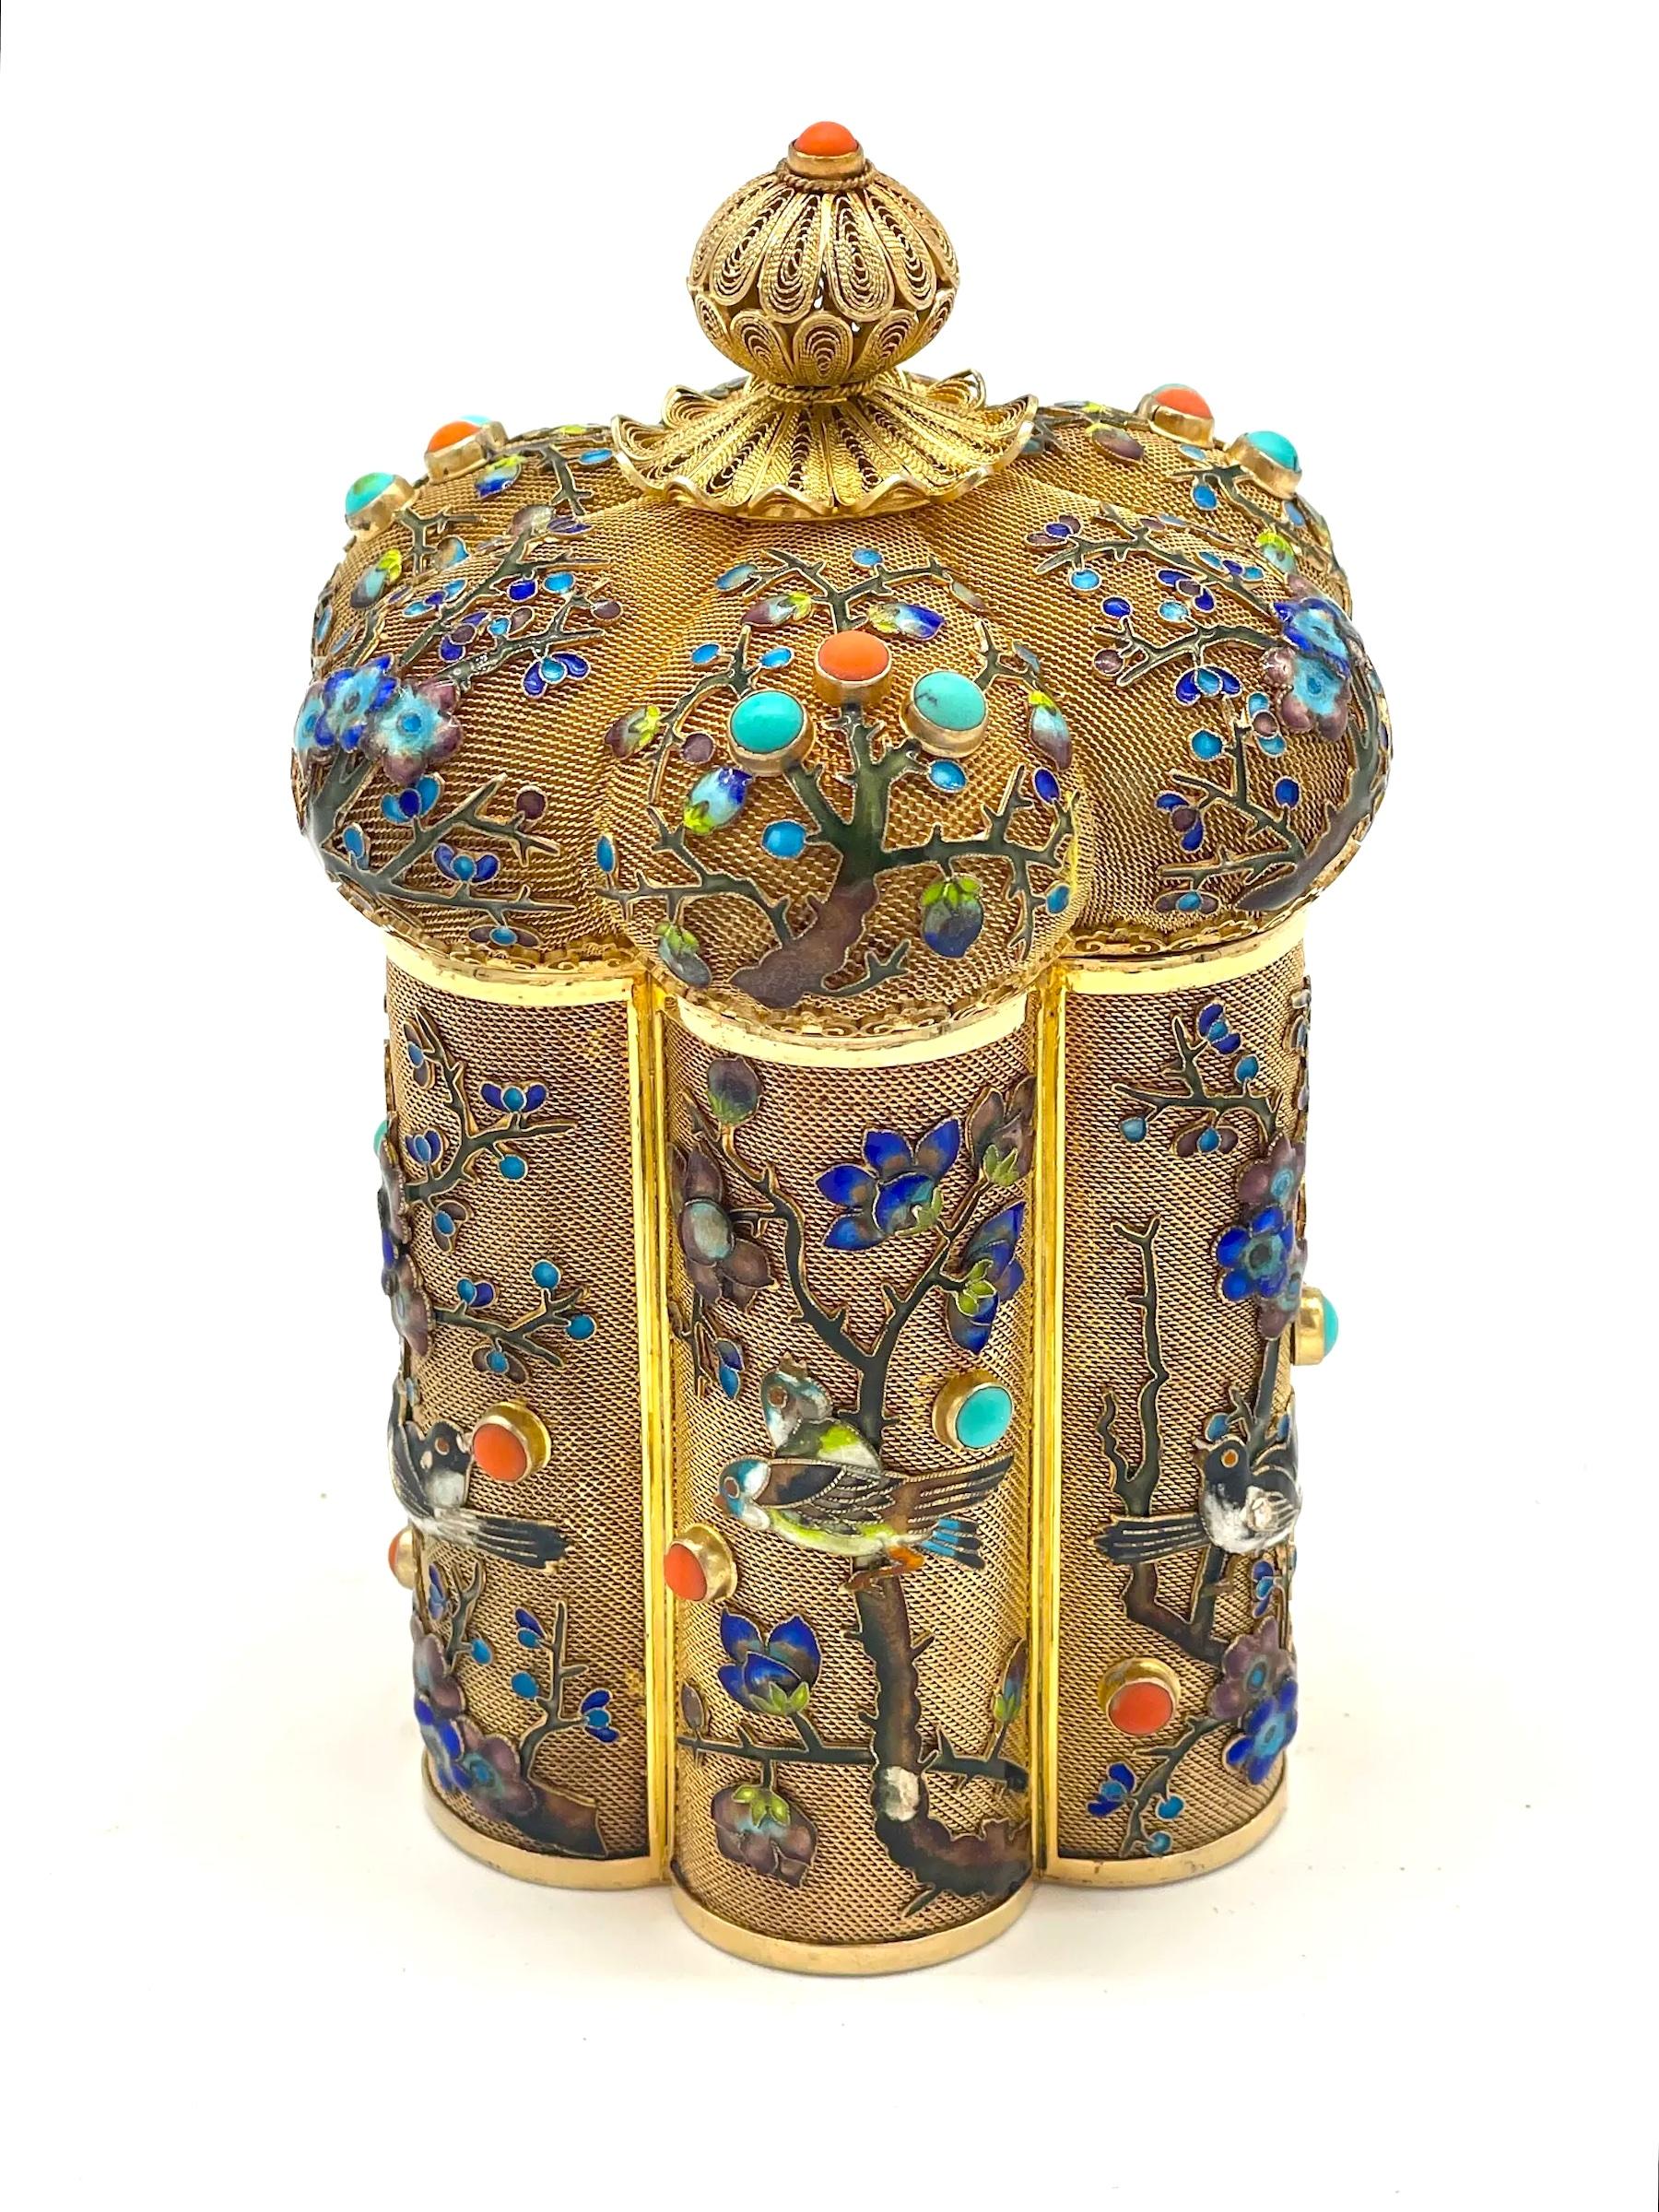 Chinese Silver Filagree Gold Washed and Enamel Bird Motif and Coral Pagoda Box
China, circa 1900s, stamped 'Silver'

An exquisite Chinese Silver Filigree Gold Washed and Enamel Bird Motif and Coral Pagoda Box, circa the early 1900s. Executed with